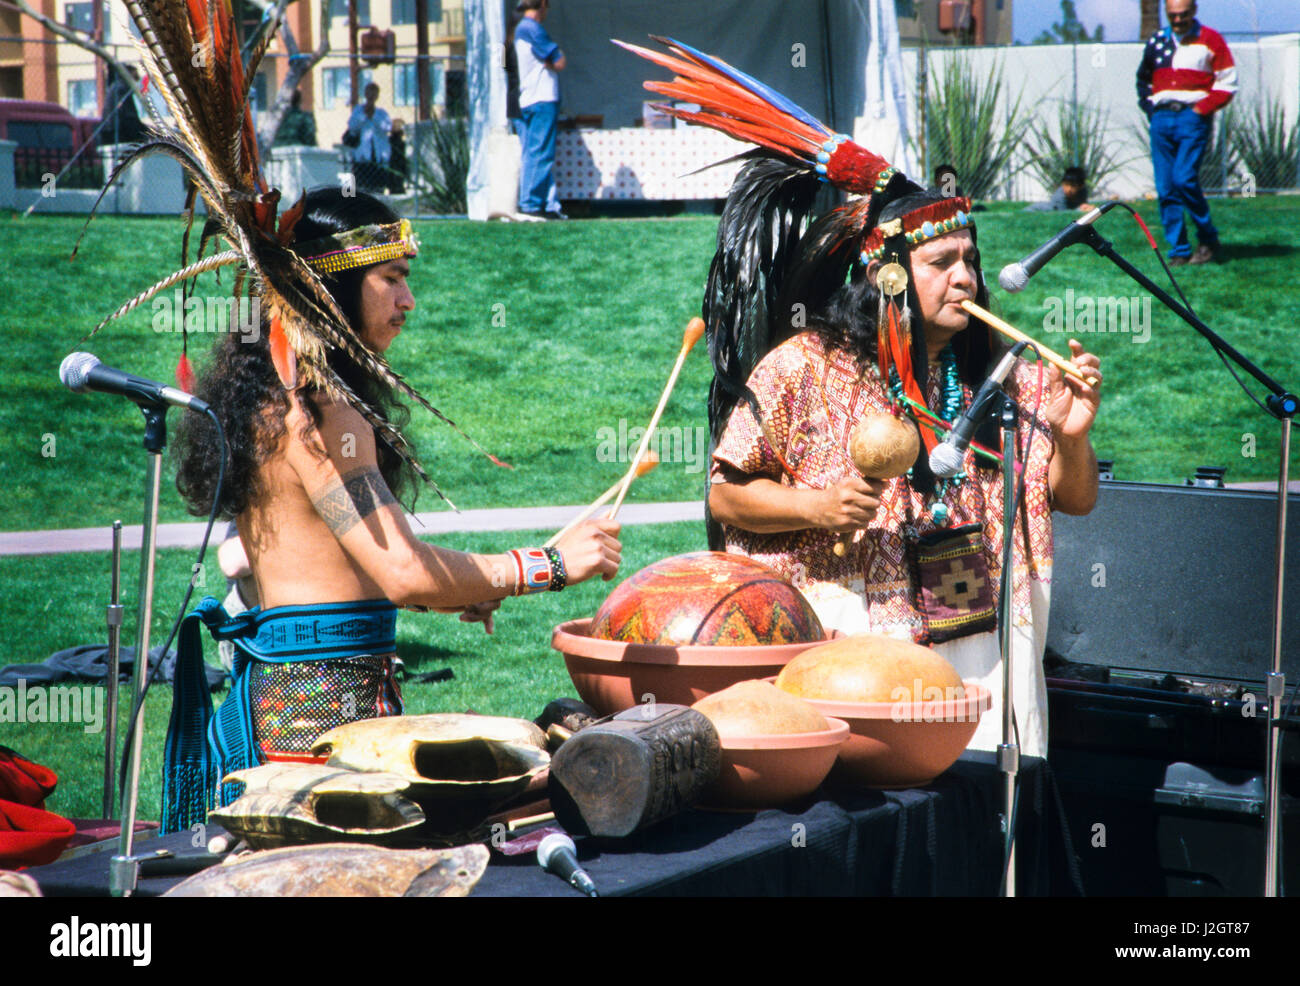 Two Aztec men demonstrate traditional musical instruments such as the wooden whistle, gourd rattles and a variety of drums Stock Photo